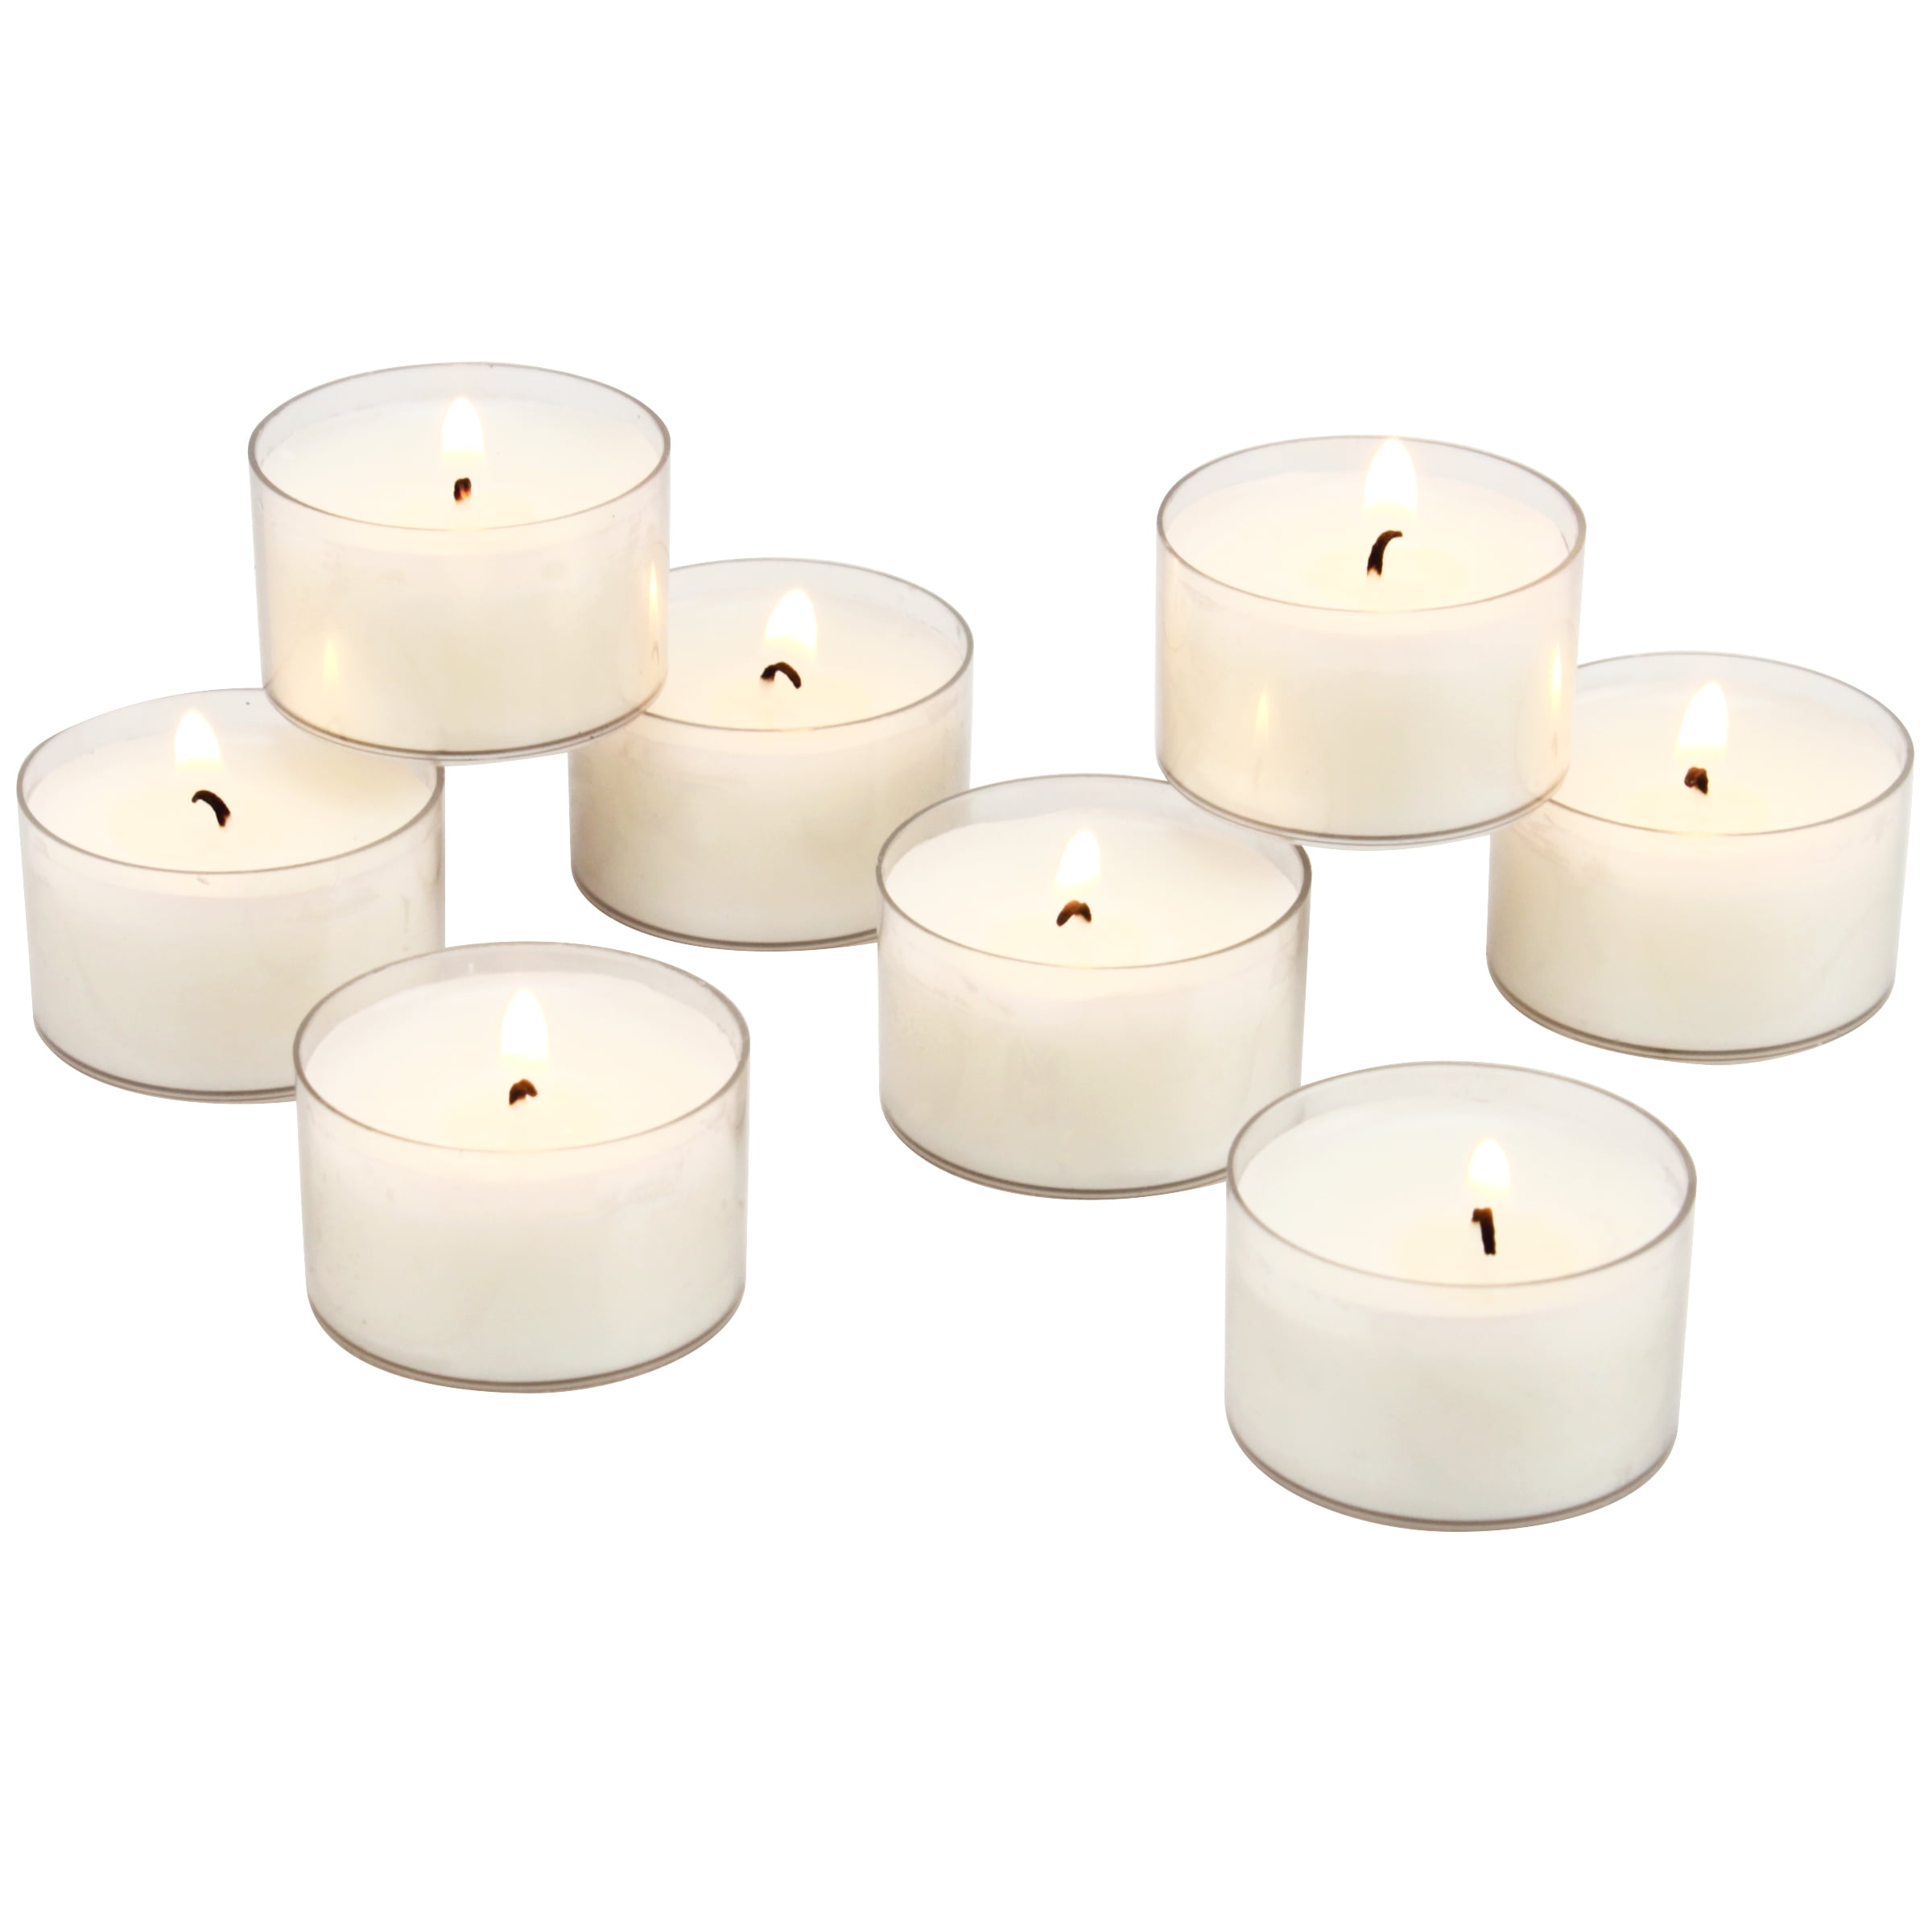 Wedding & All Events Tea light white Unscented Candle Long Burning time 